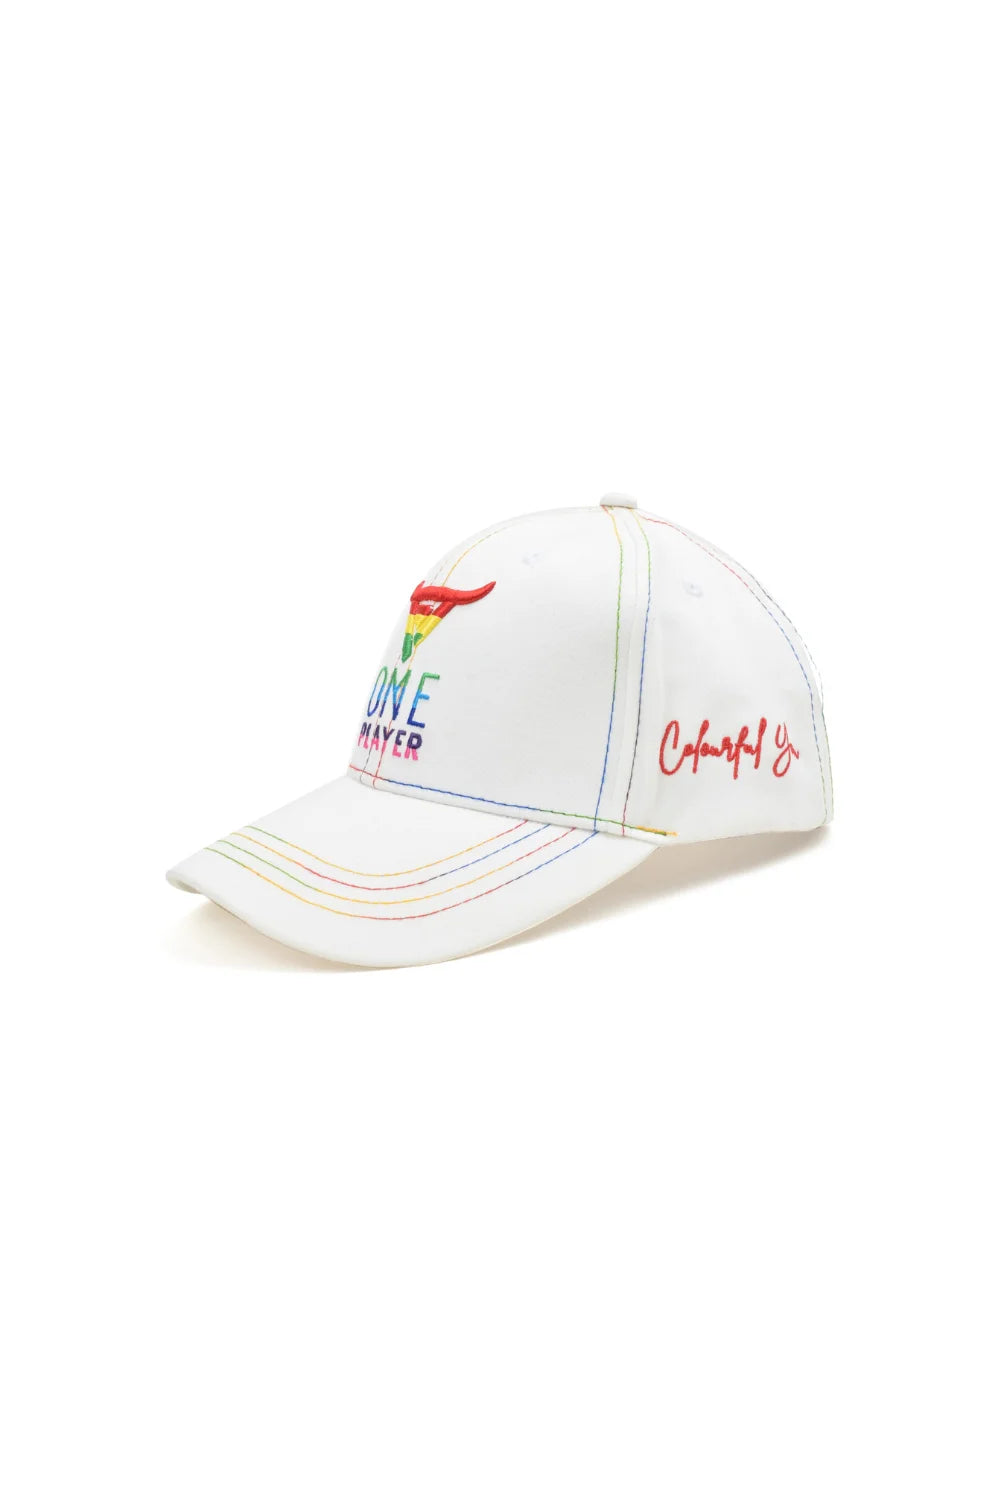 Unisex White Multi Color  Limited Edition Cap by One Player